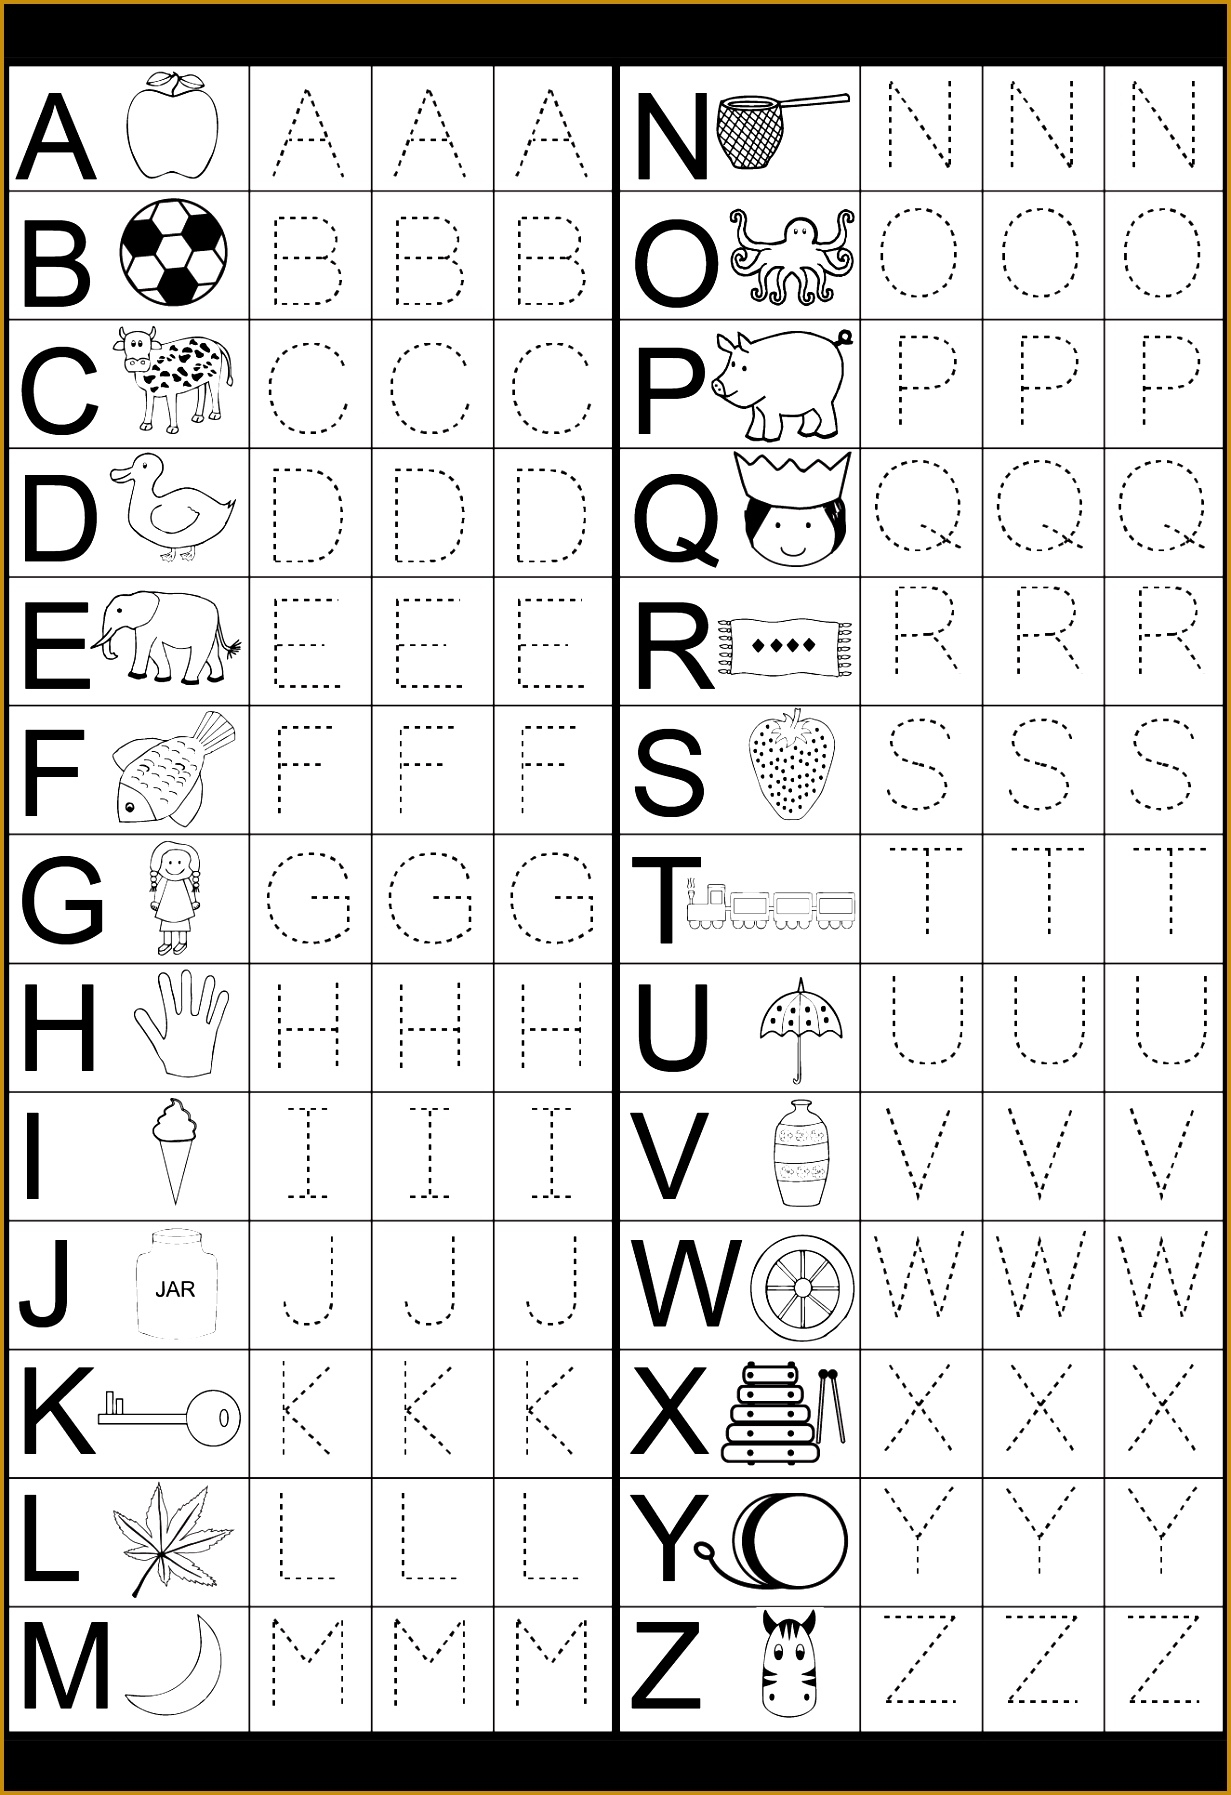 Free website with printable worksheets numbers letters shapes everything for different grade levels 17951231